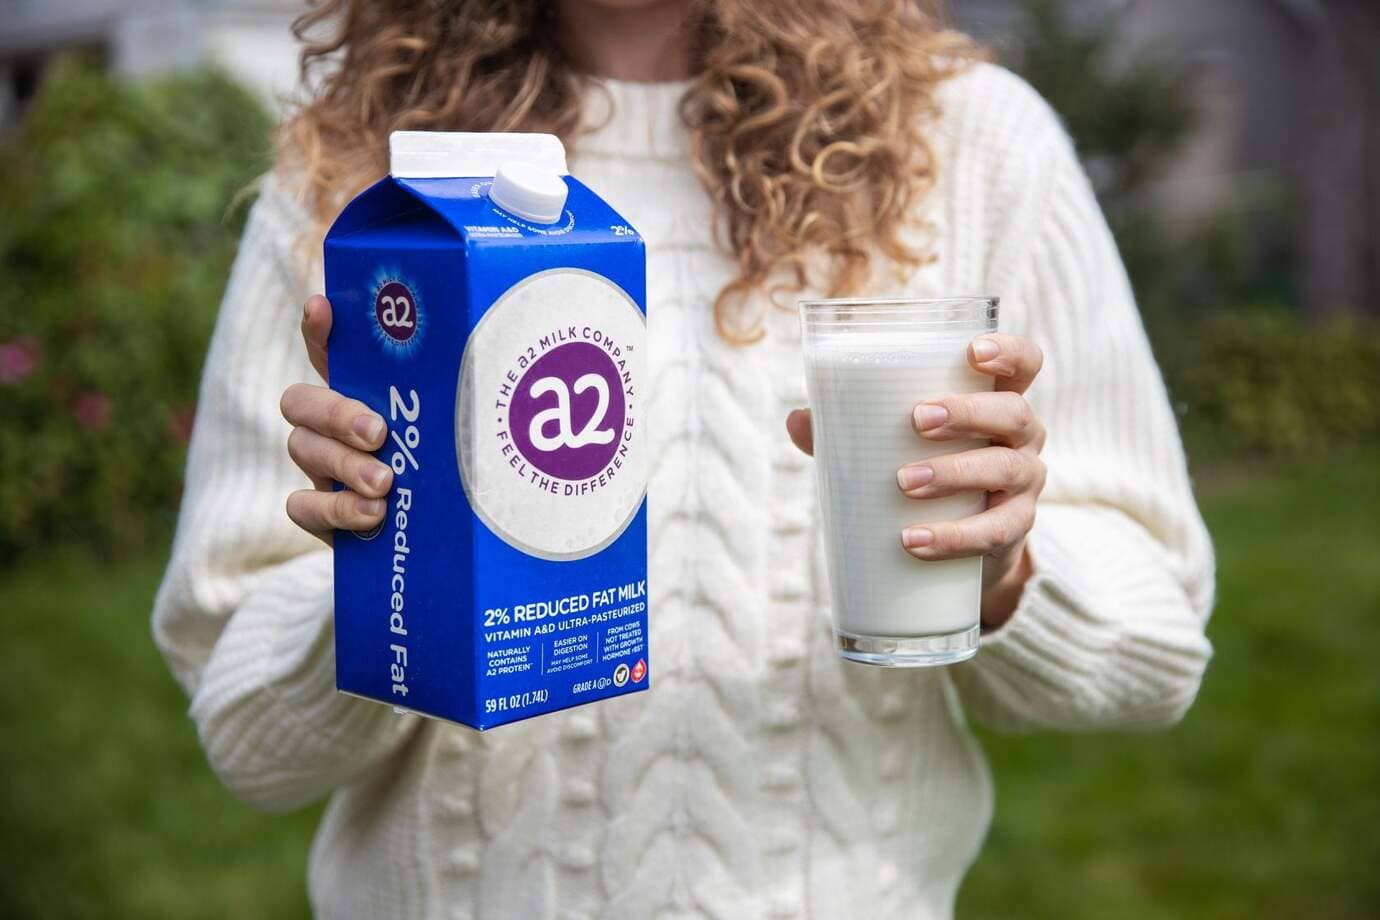 Why does a2 Milk® have a longer shelf life?